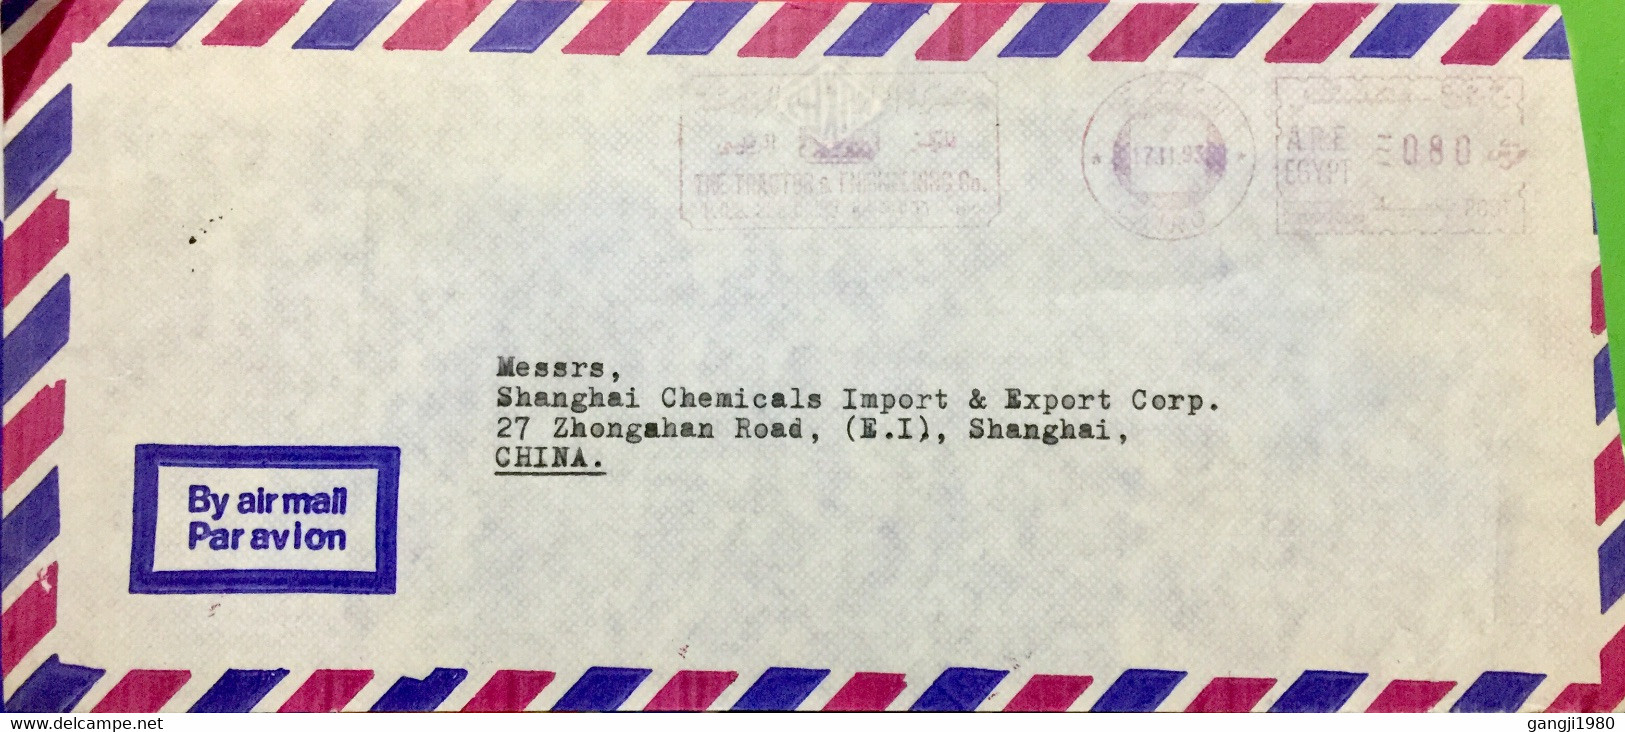 EGYPT 1993, AIRMAIL COVER USED TO CHINA, METER CANCEL, ADVERTISING THE TRACTOR & ENGINEERING COMPANY - Storia Postale